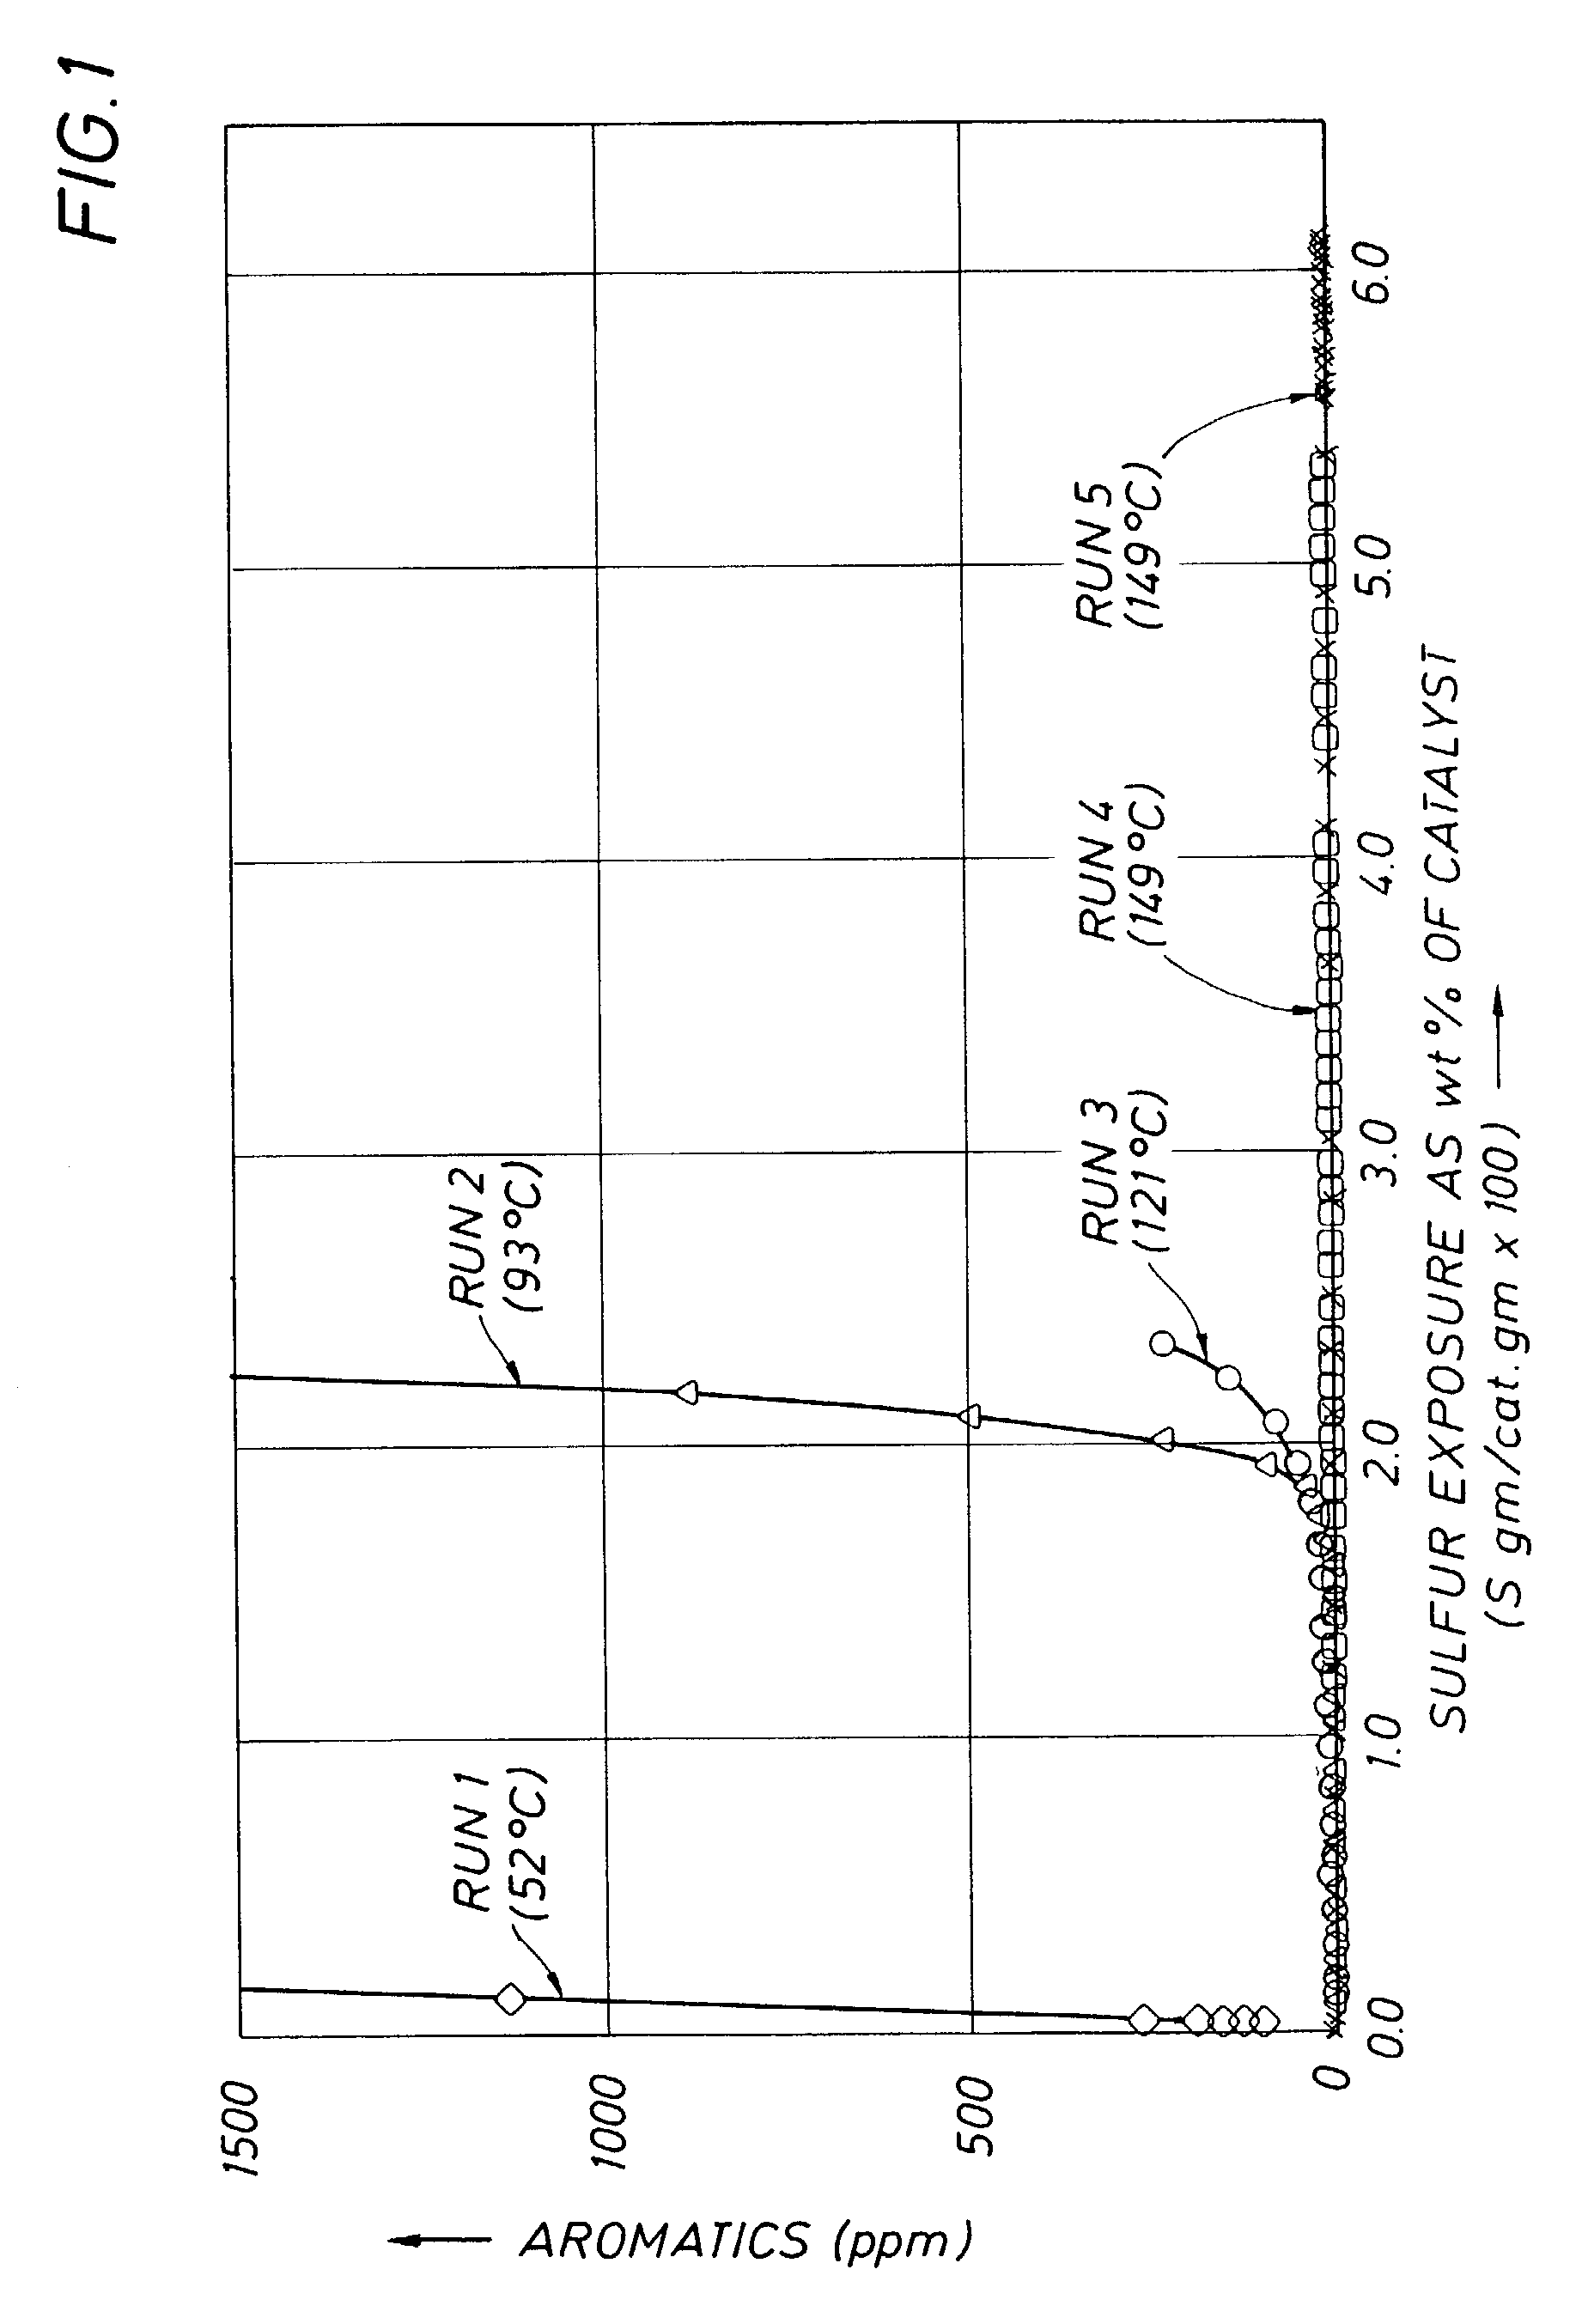 Process for hydrogenation of aromatics in hydrocarbon feedstocks containing thiopheneic compounds